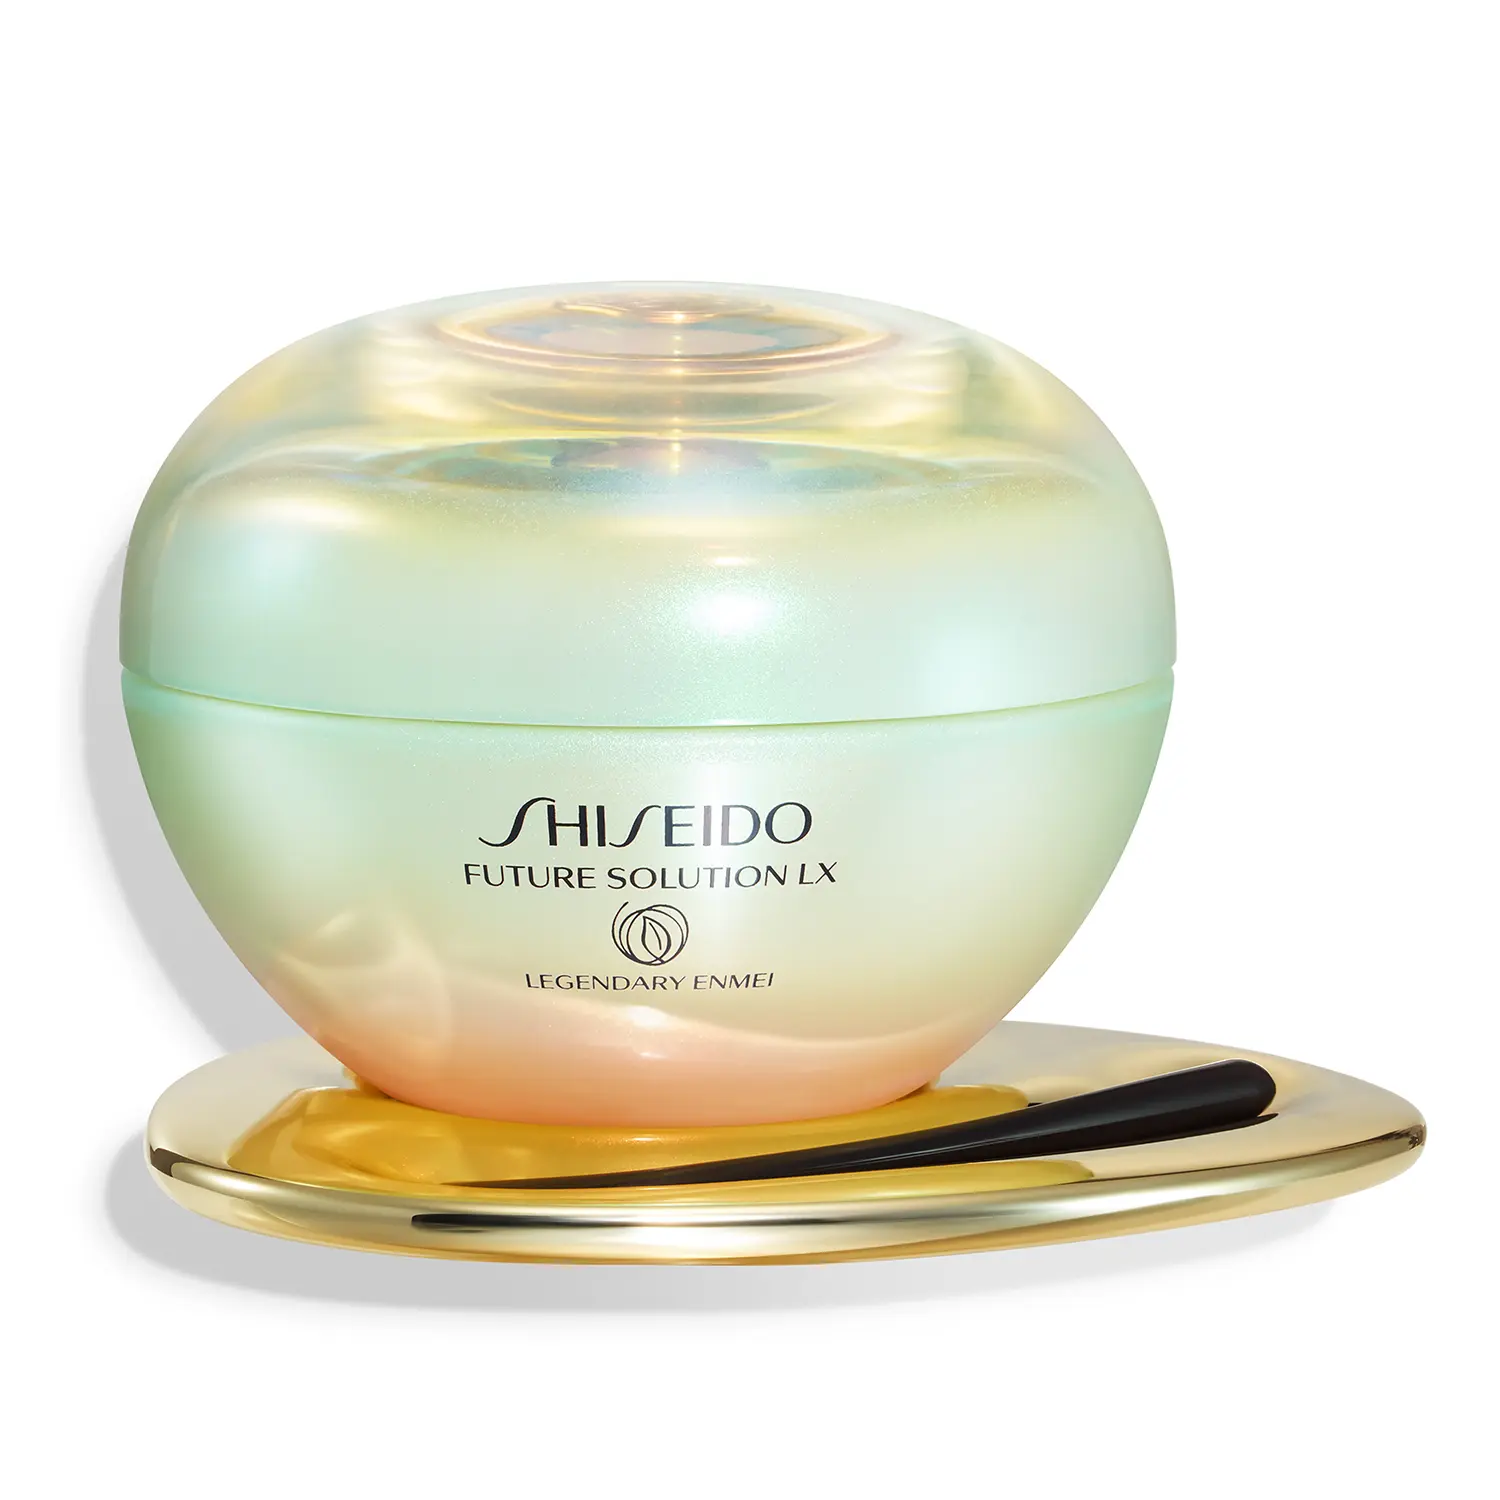 Shiseido Future Solution LX Legendary Enmei Cream with Plant Extracts and Silk